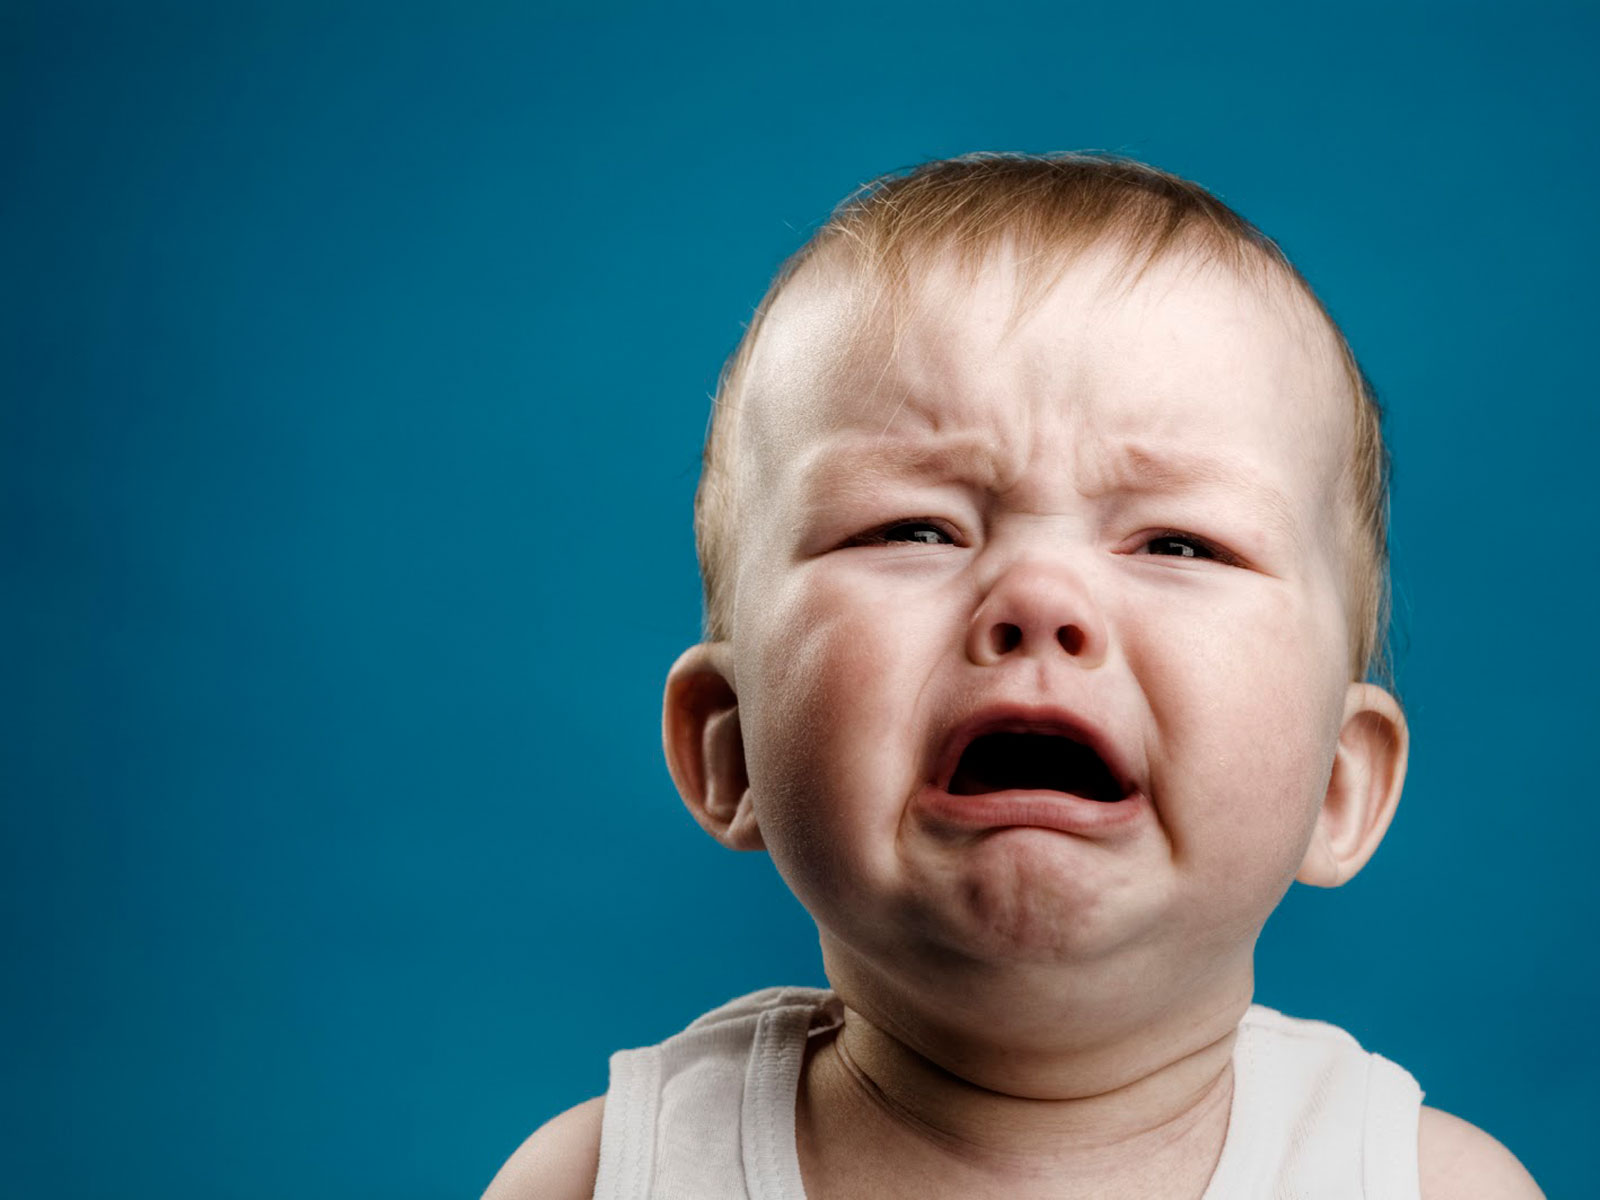 Download this Funny Baby Crying picture